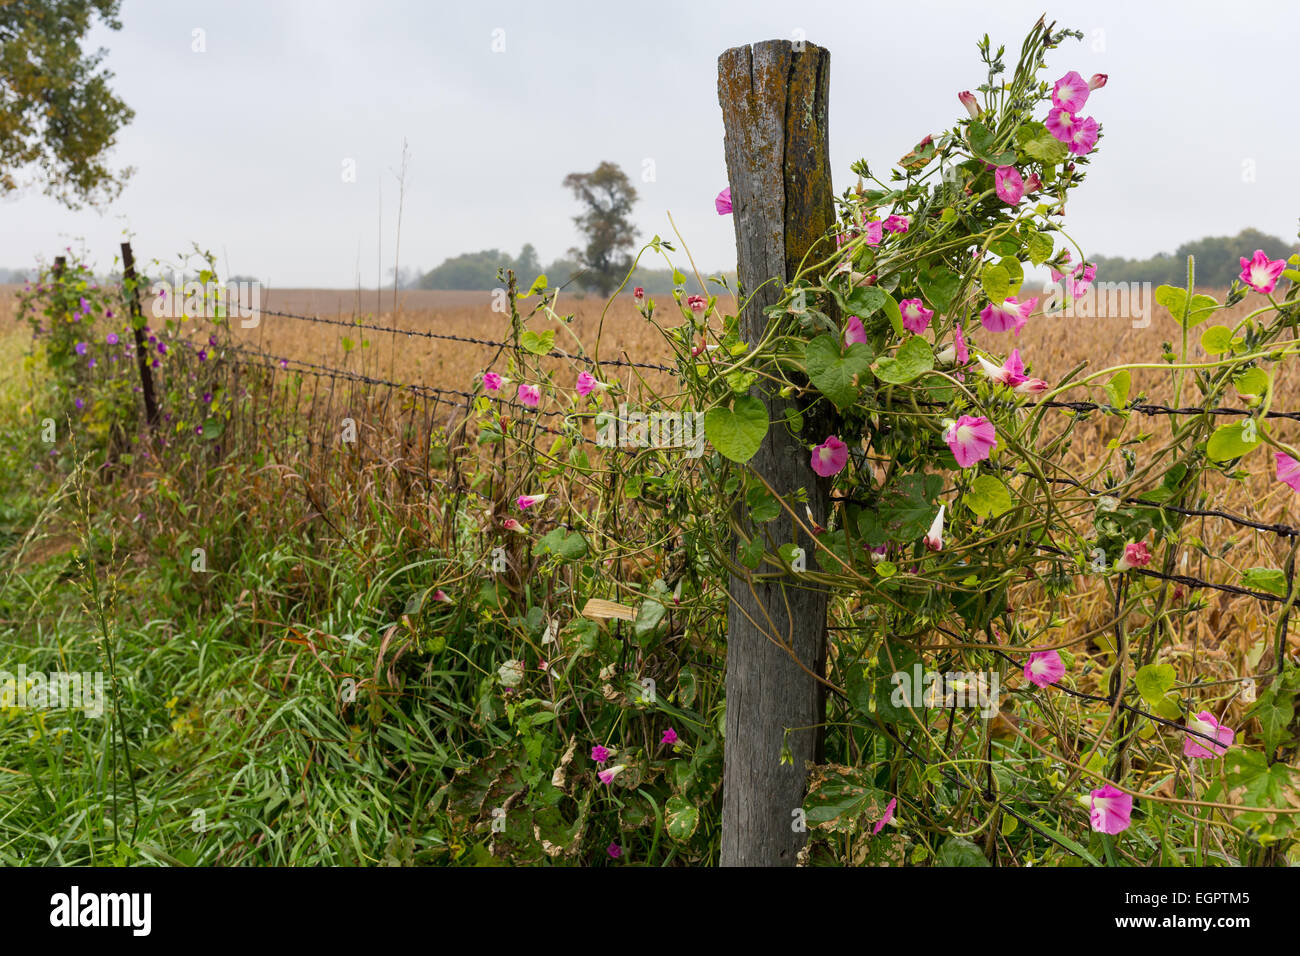 A morning glory climbs a fence post in rural Illinois. Stock Photo